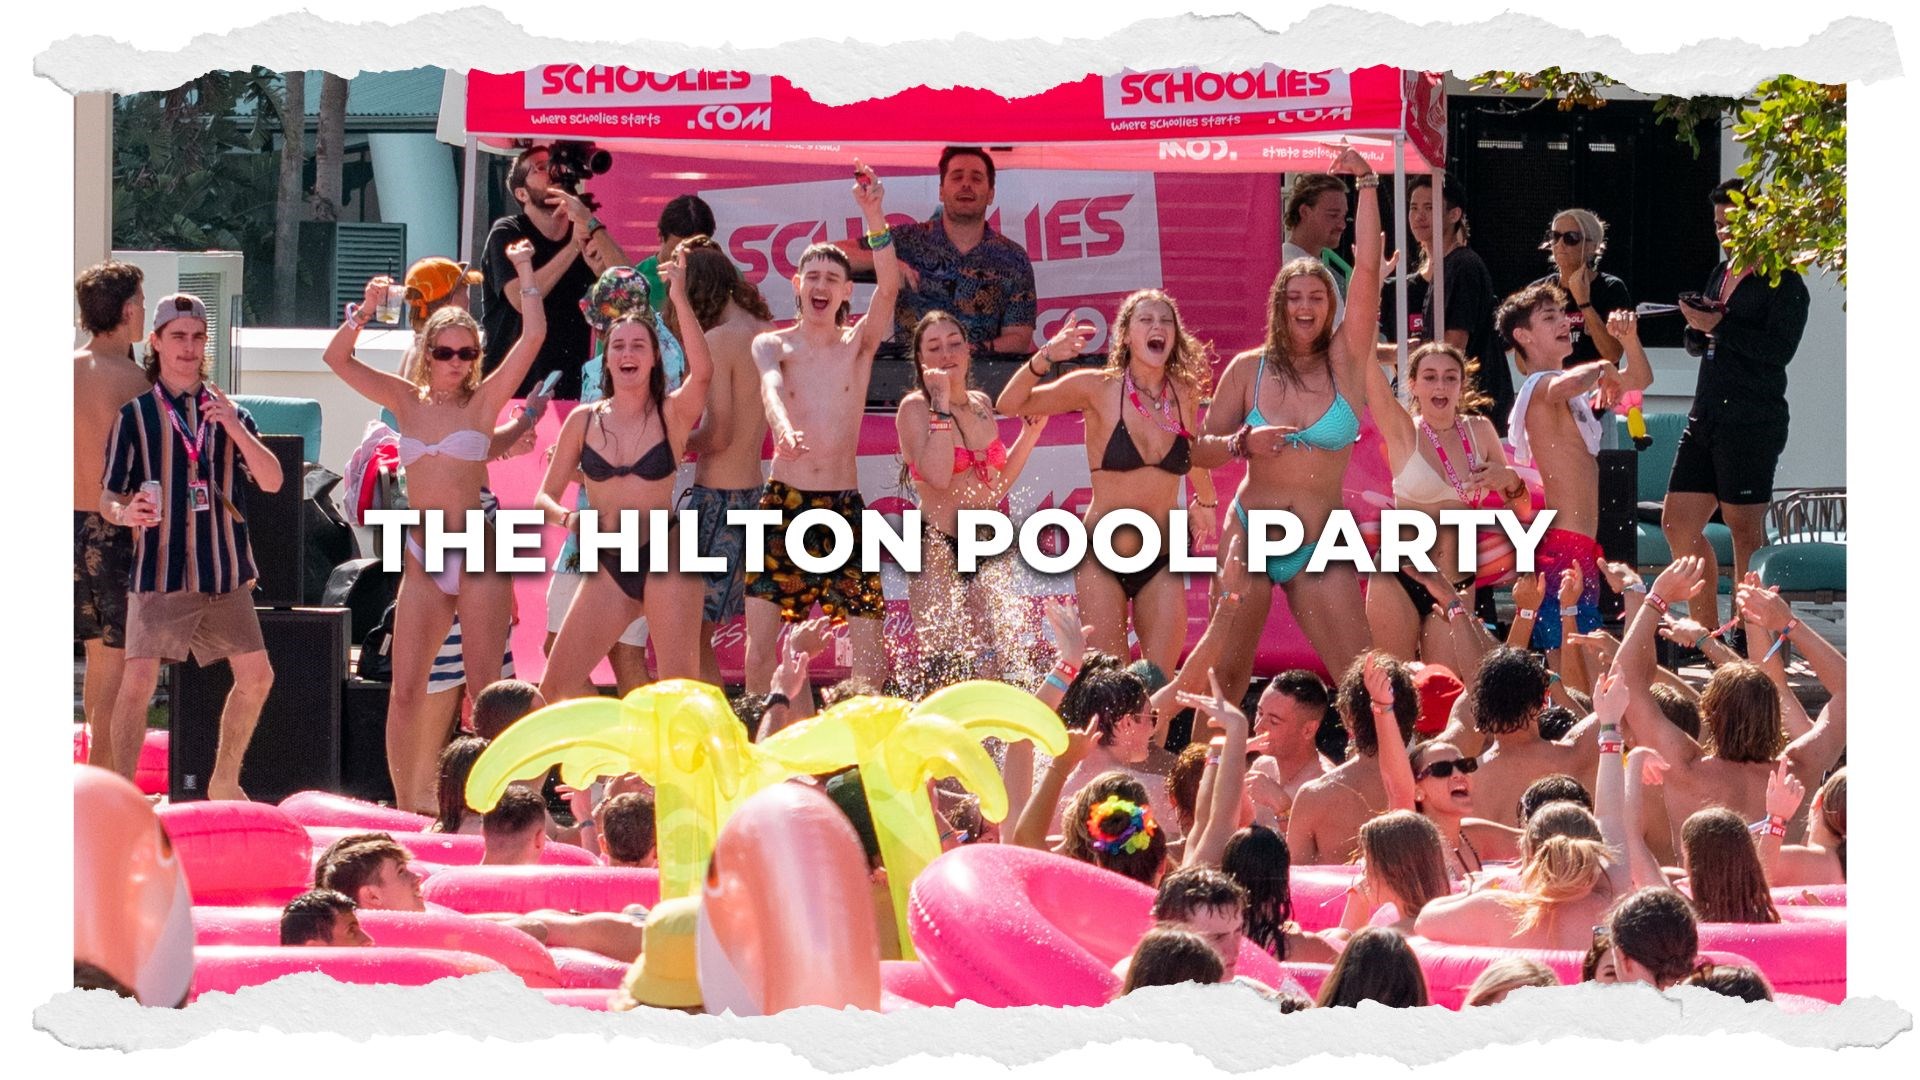 all-age-events-hilton-pool-party-wk2.jpg